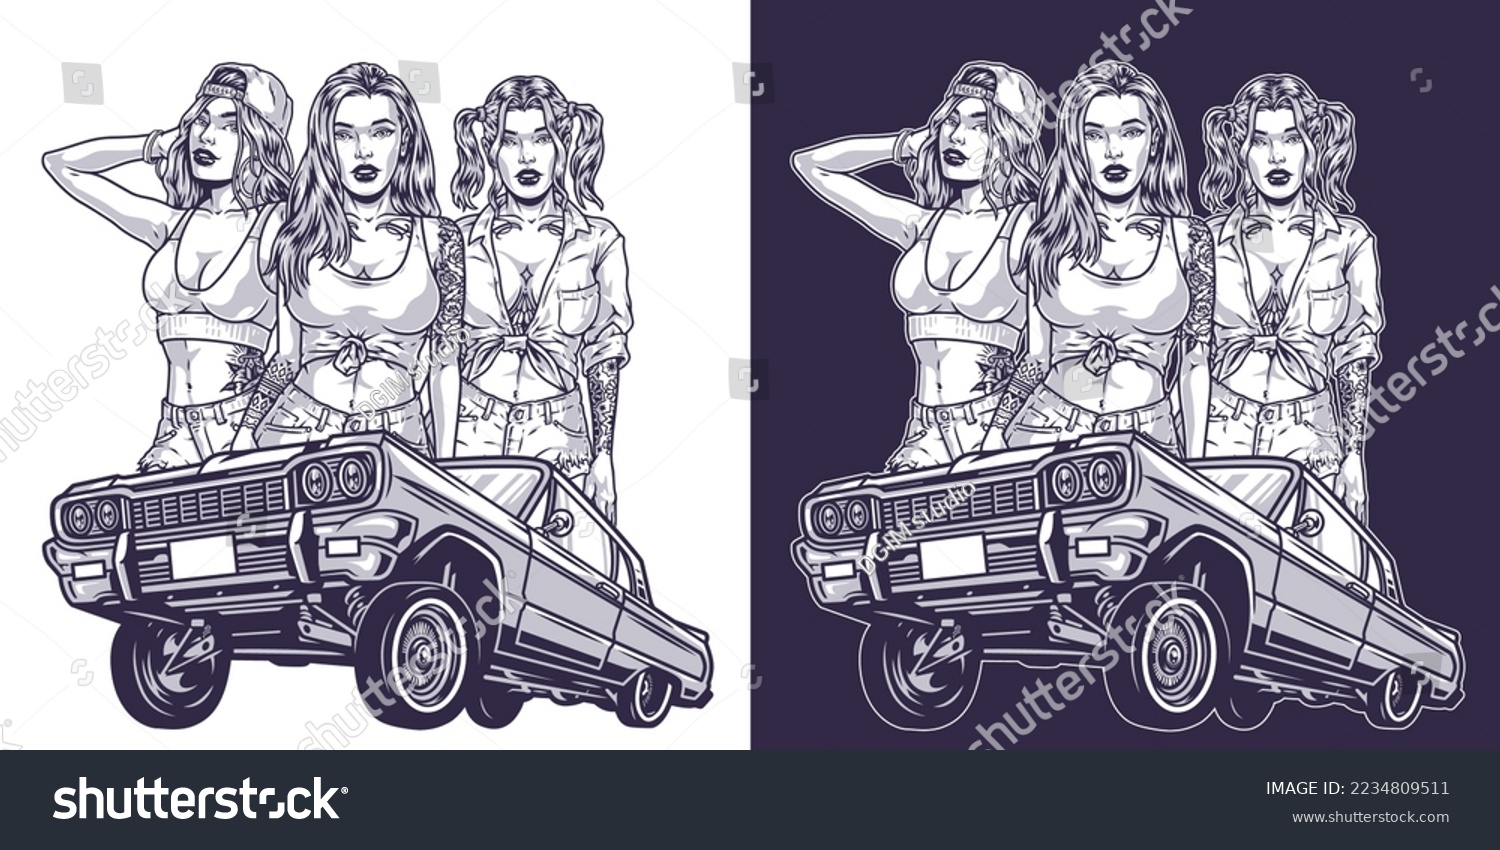 SVG of Hot Girls Lowriders monochrome sticker with retro car and girl friends posing in cocky looks for drivers magazine vector illustration svg